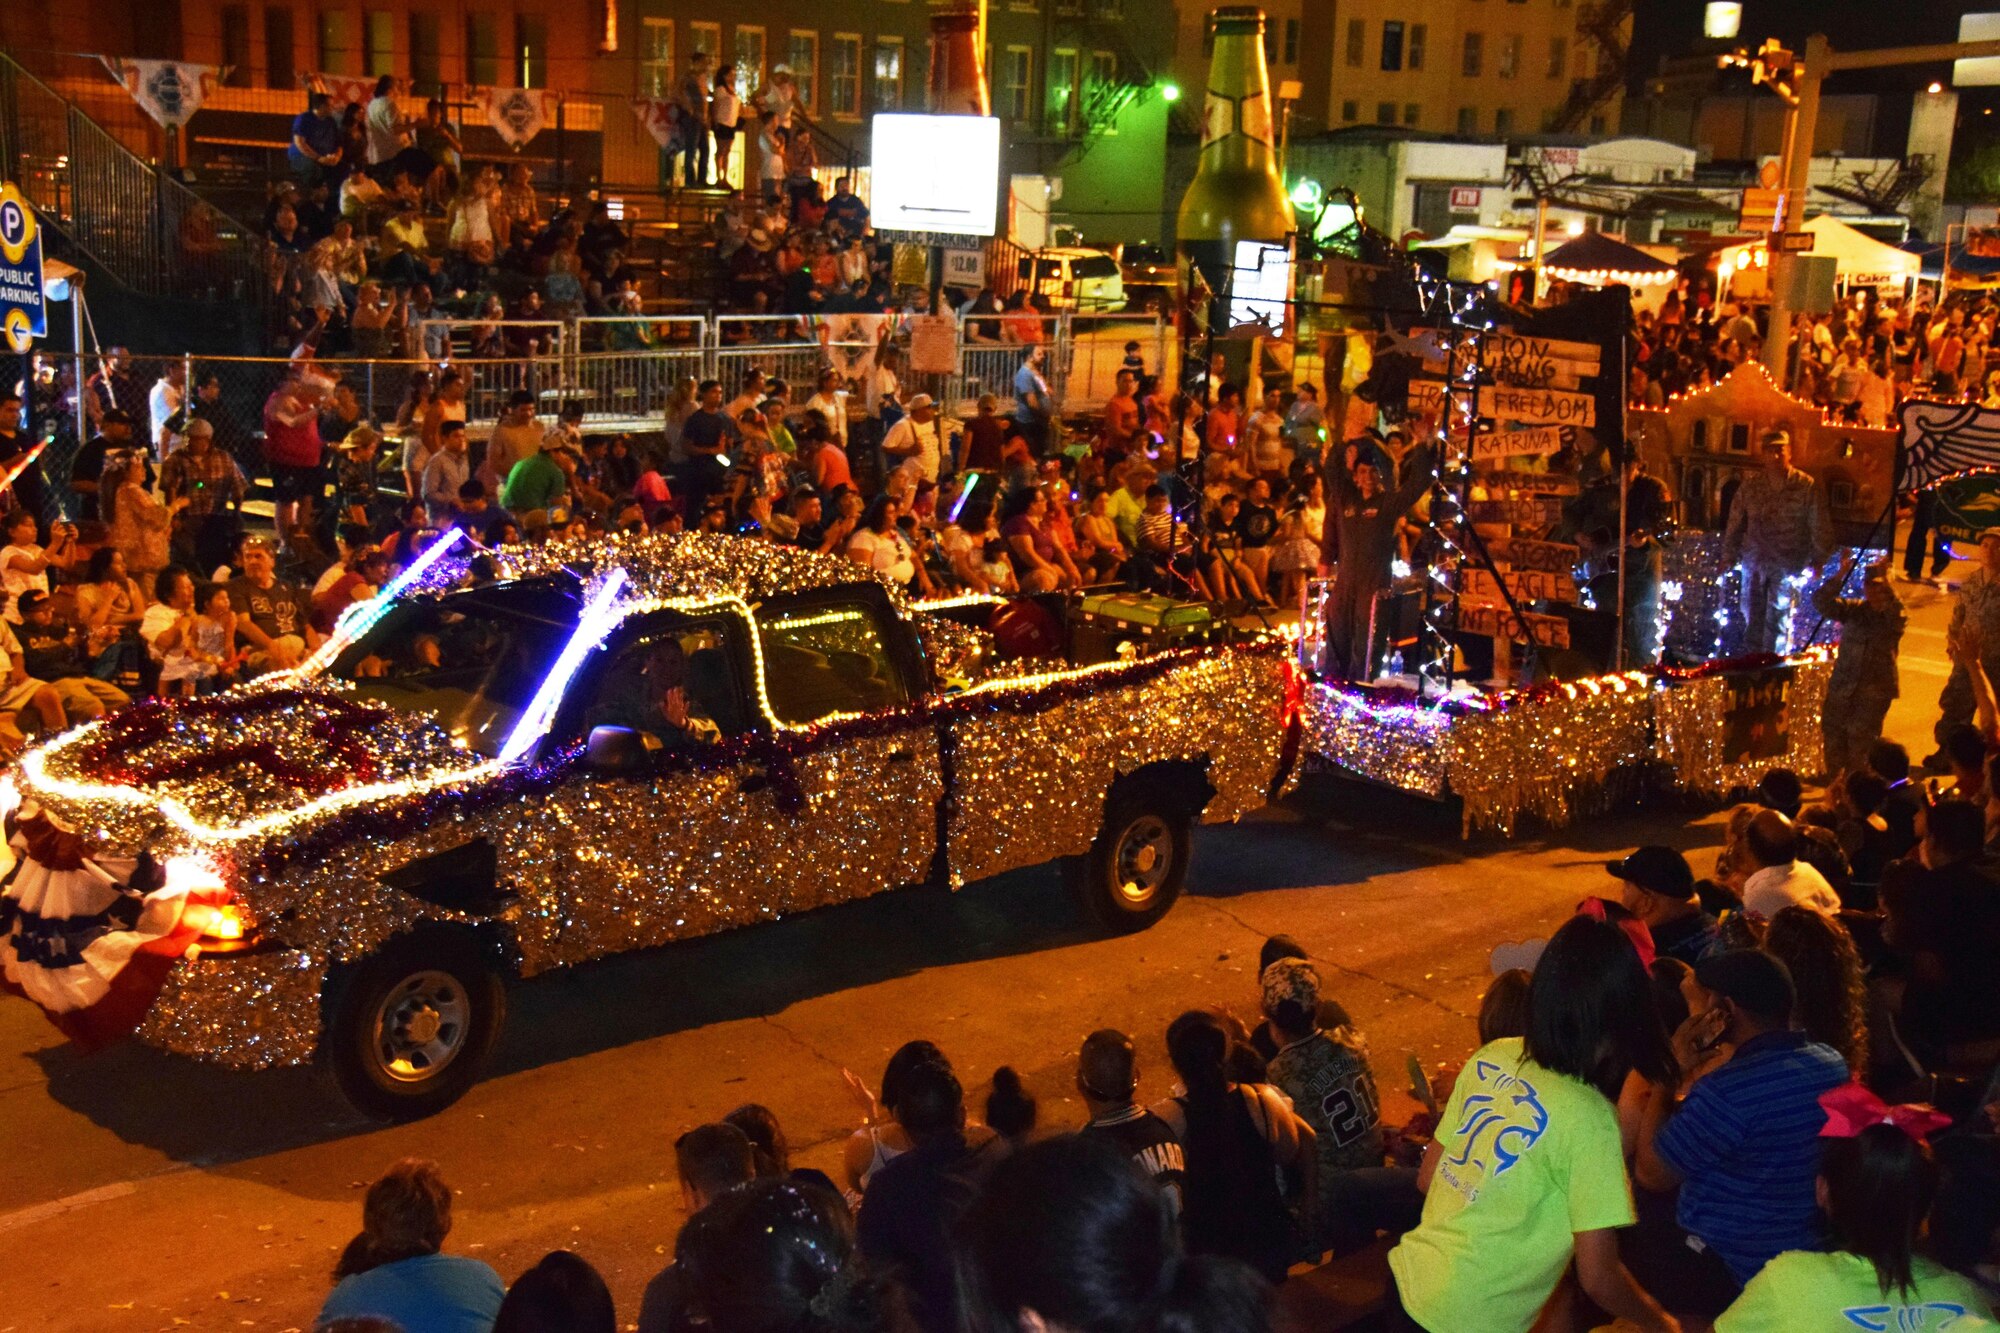 The 433rd Airlift Wing's "M*A*S*H” themed float moves through downtown San Antonio during the Fiesta Flambeau Parade, April 25, 2015. The parade's theme was “Television: Then and Now,” and according to the Fiesta San Antonio program is “America’s largest illuminated night parade.” Over 600,000 spectators lined the streets of San Antonio on a humid spring evening to see over 200 floats and marching bands perform in the grand finale of Fiesta Week. It is estimated 750,000 viewers (television and internet) watched this year's parade. (U.S. Air Force Photo/ Tech. Sgt. Carlos J. Trevino)
